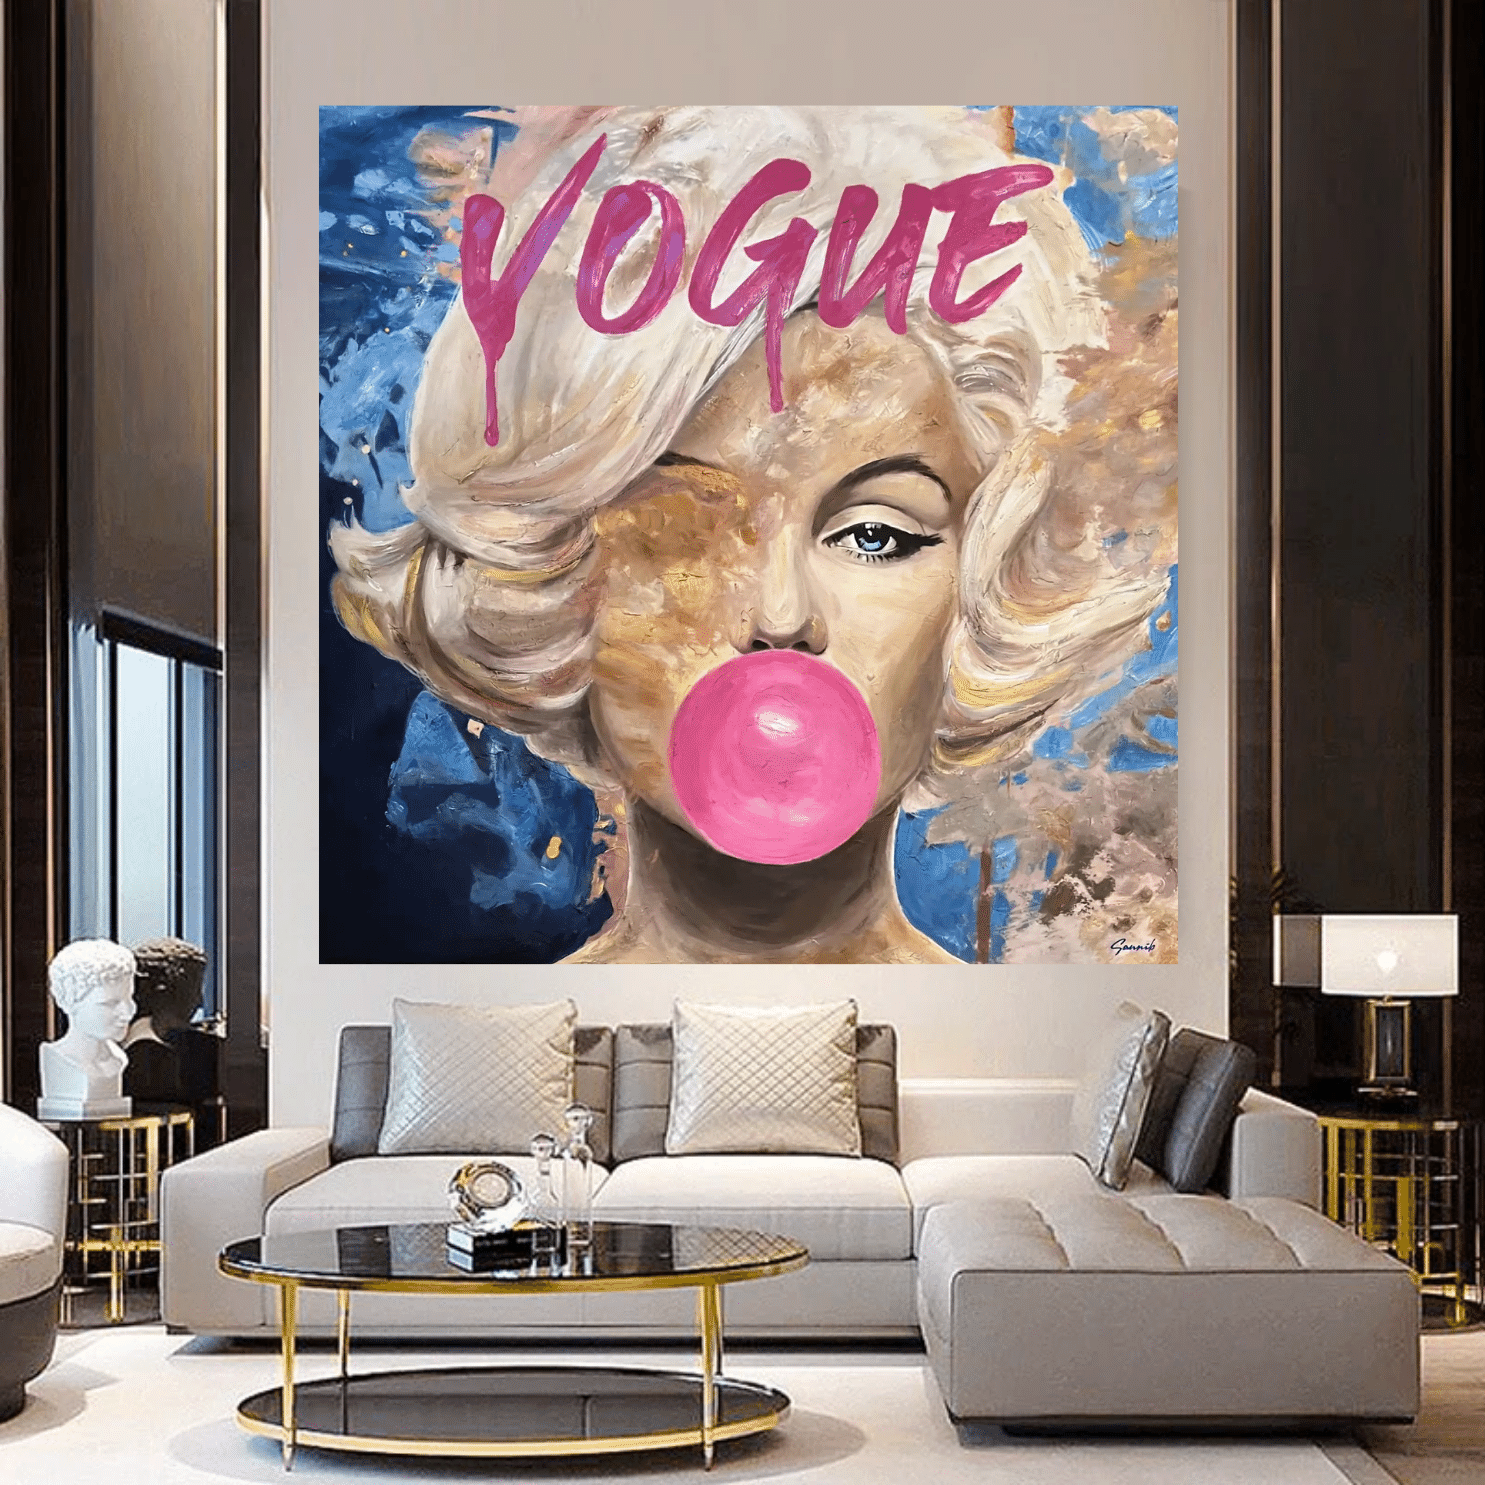 Canvas Wall Arts: Stunning Prints for Every Space – GraffitiWallArt